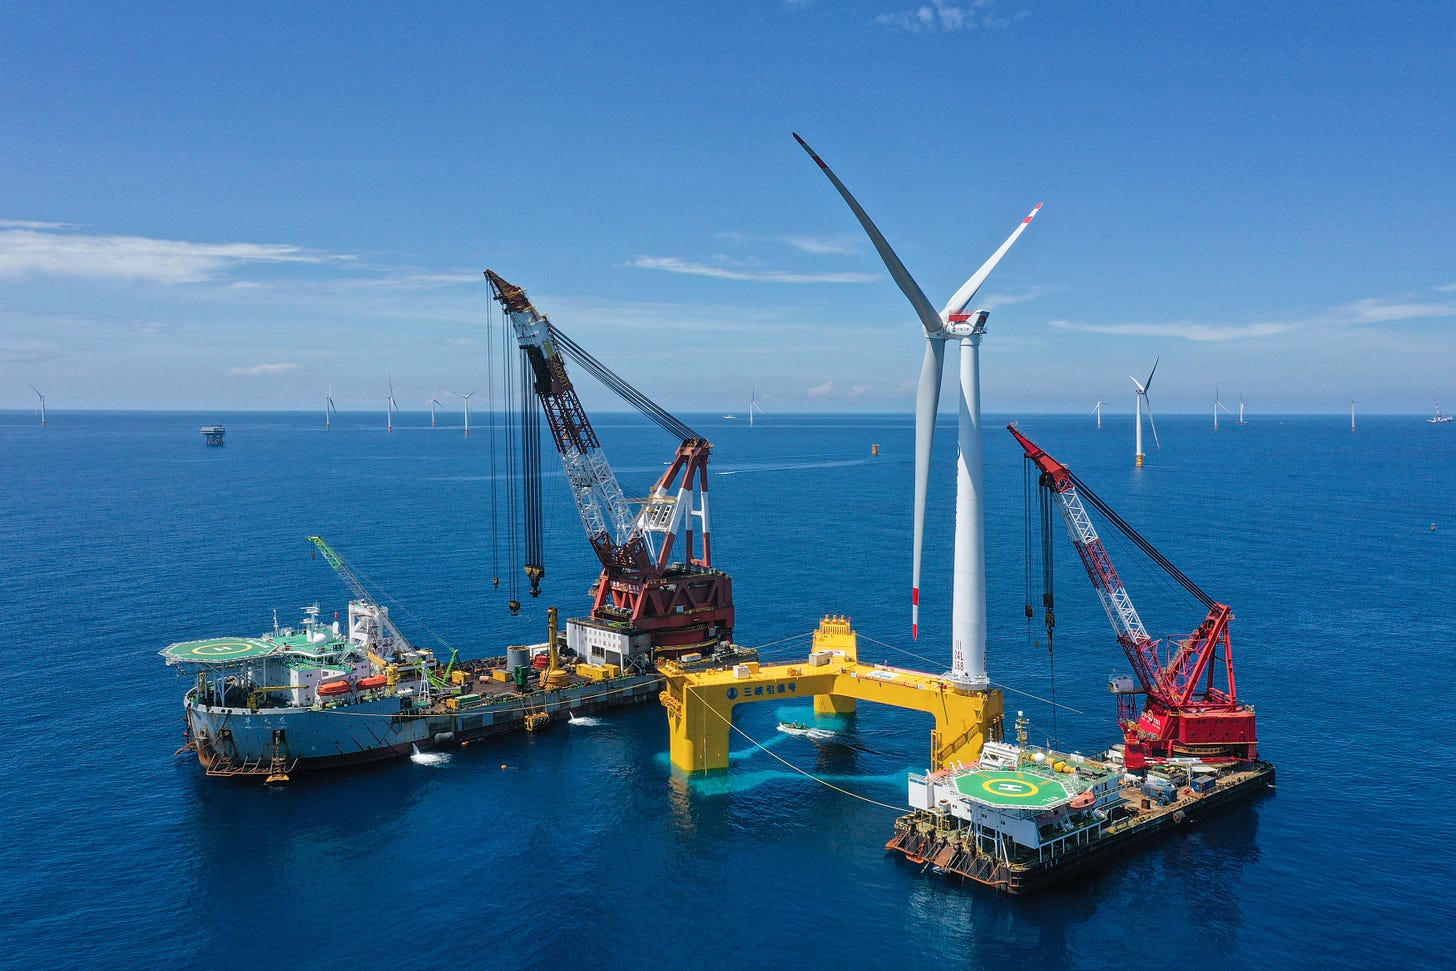 How to Build an Offshore Wind Farm - Scientific American